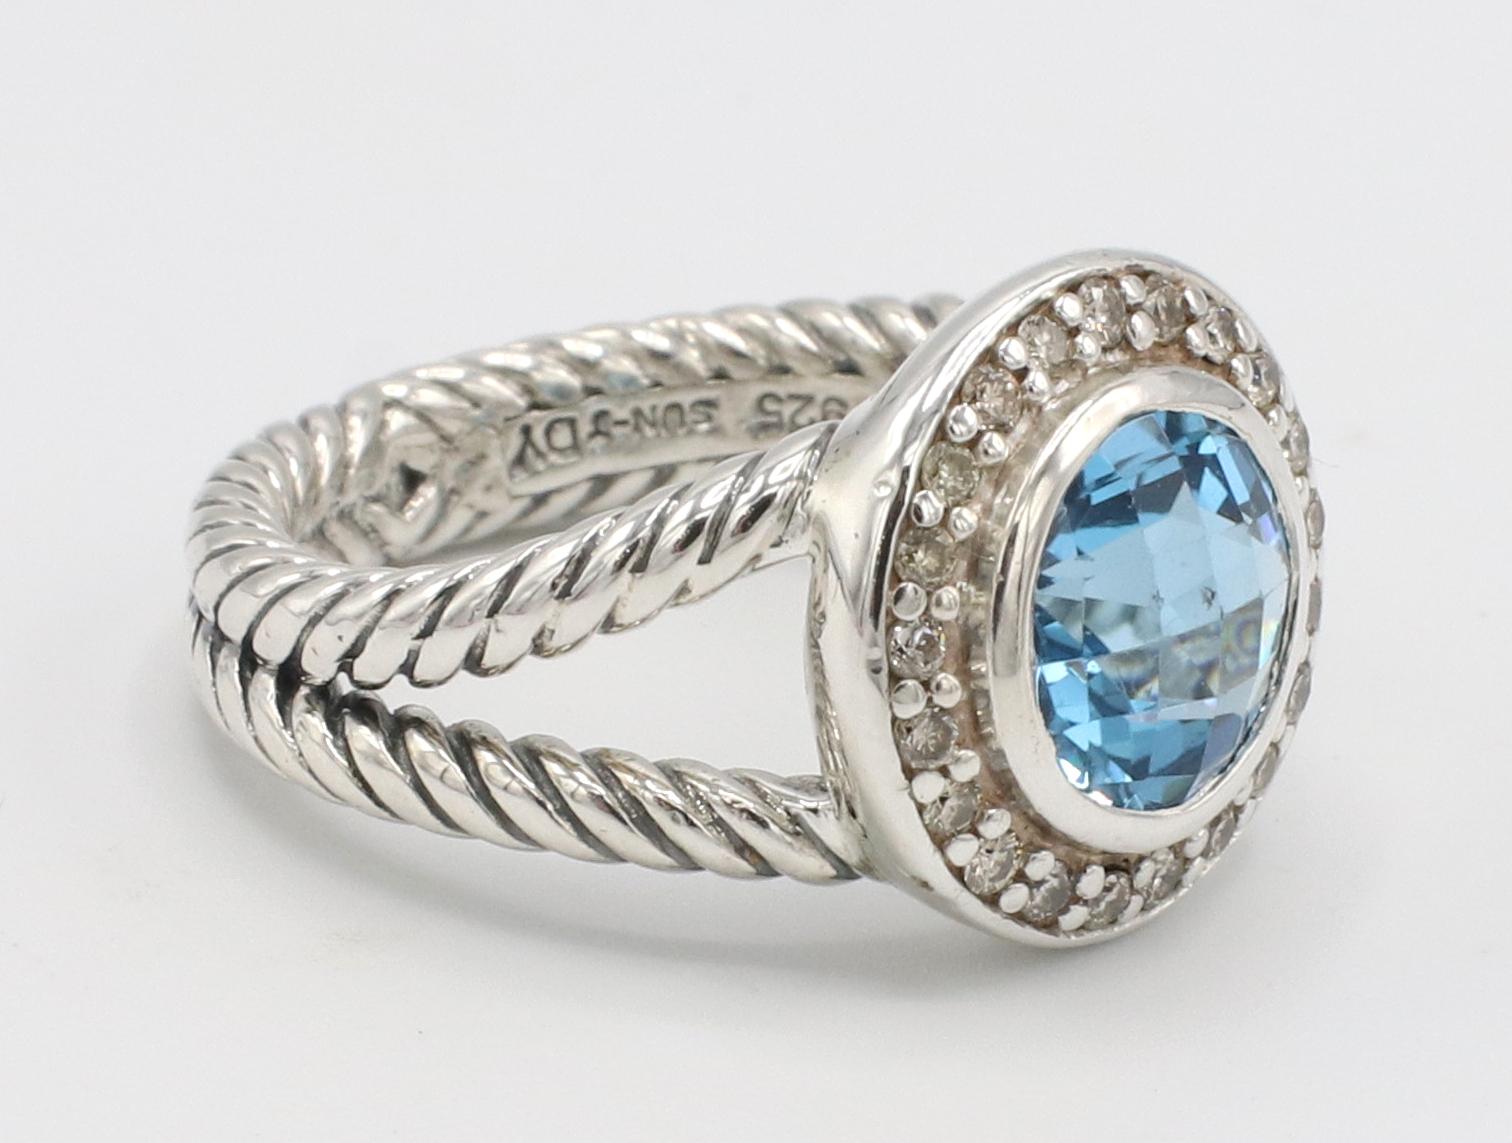 David Yurman Sterling Silver Blue Topaz & Natural Diamond Halo Ring 
Metal: Sterling silve 925
Weight: 6.66 grams
Diamonds: Approx. .23 CTW G-H VS round natural diamonds
Top: 13.5mm
Size: 6 (US)
